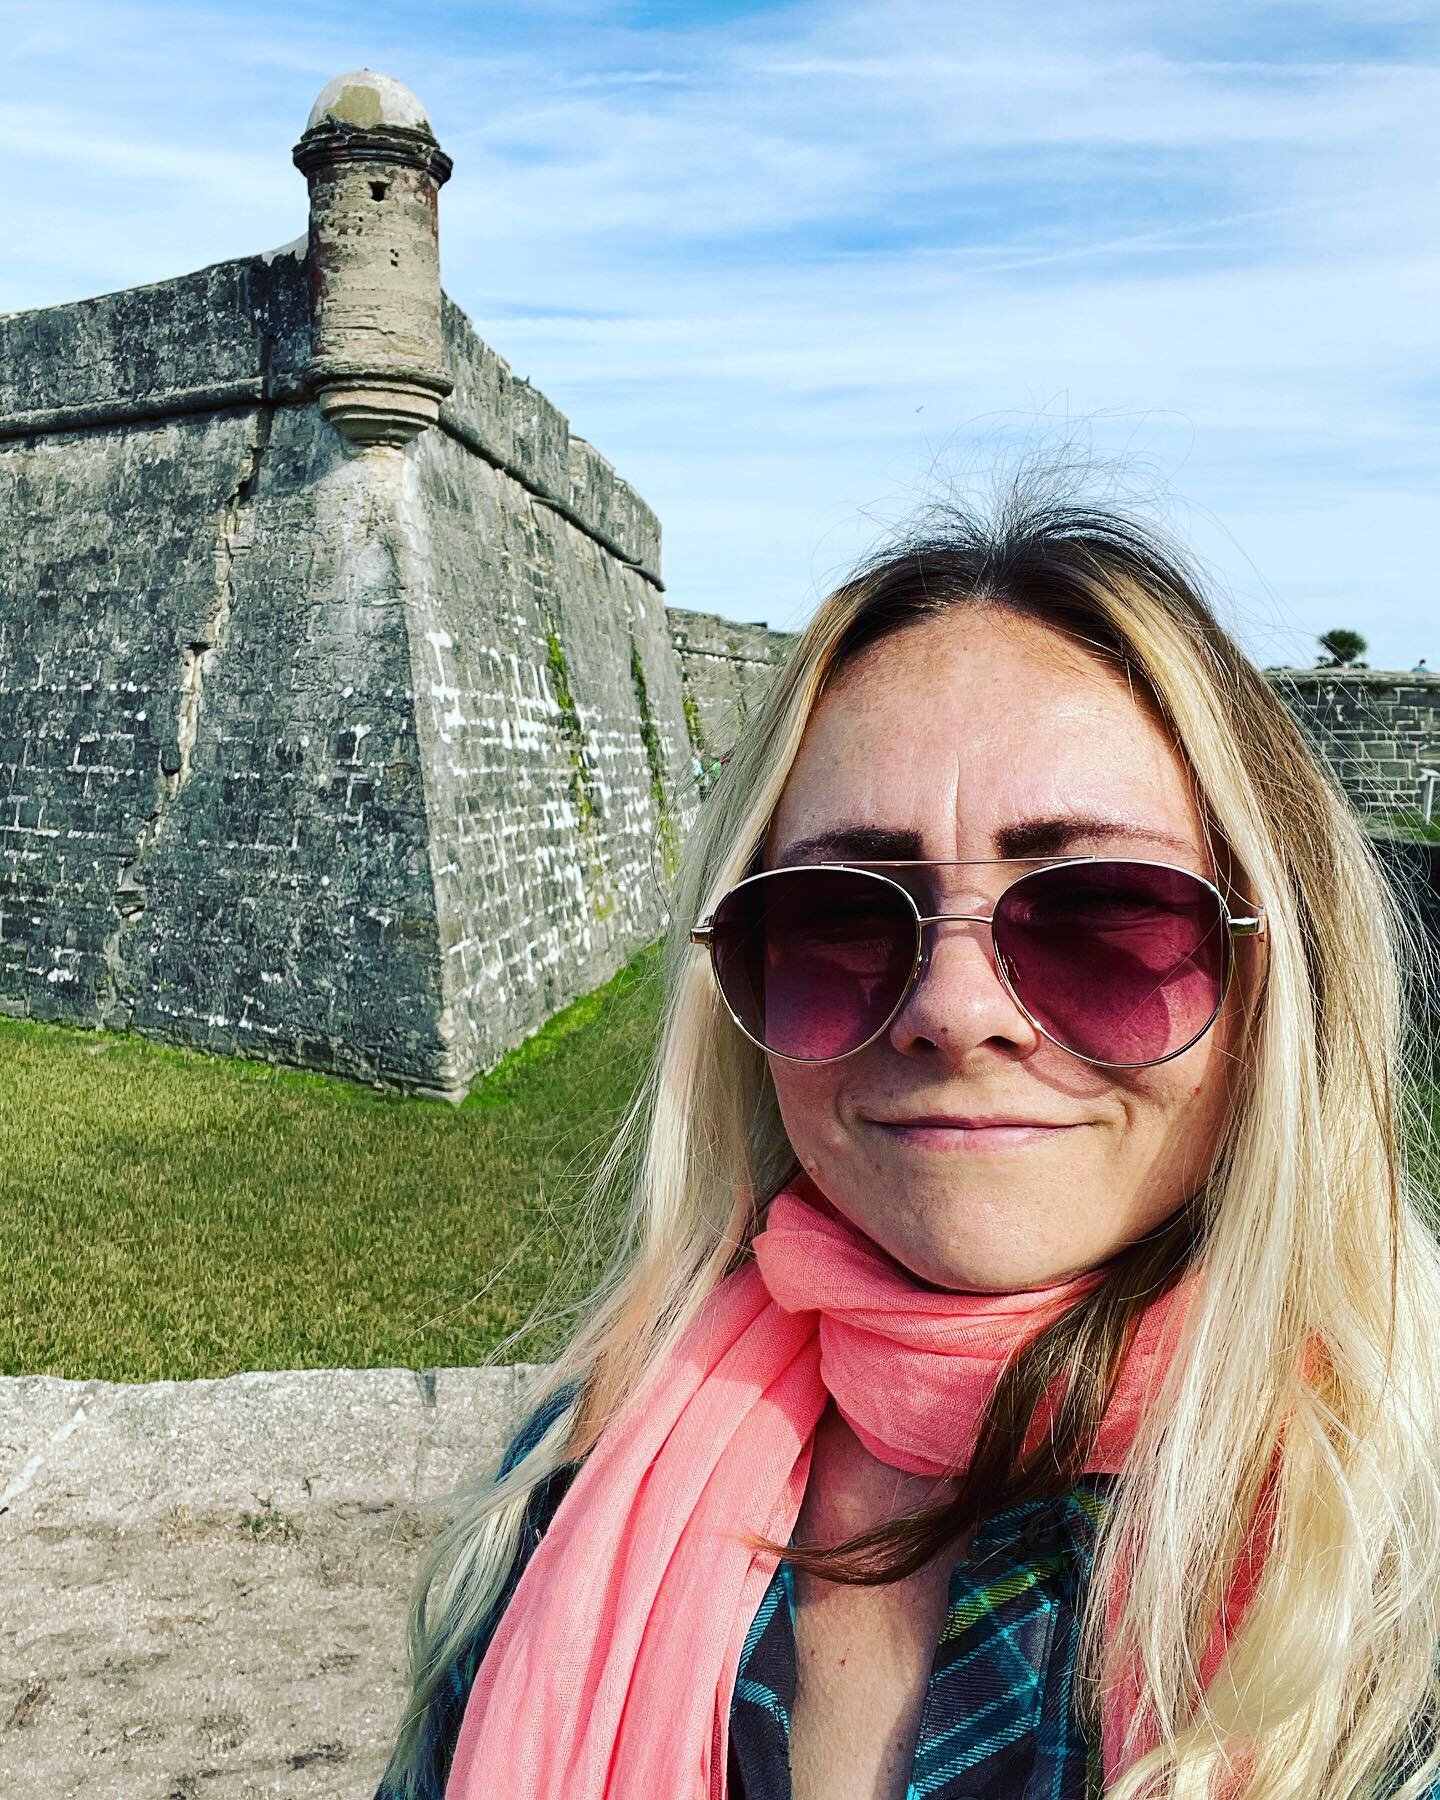 Rocking it in St Augustine.  So inspired by the history, legends, ghosts and beauty of this place. #filmmakerlife #staugustine